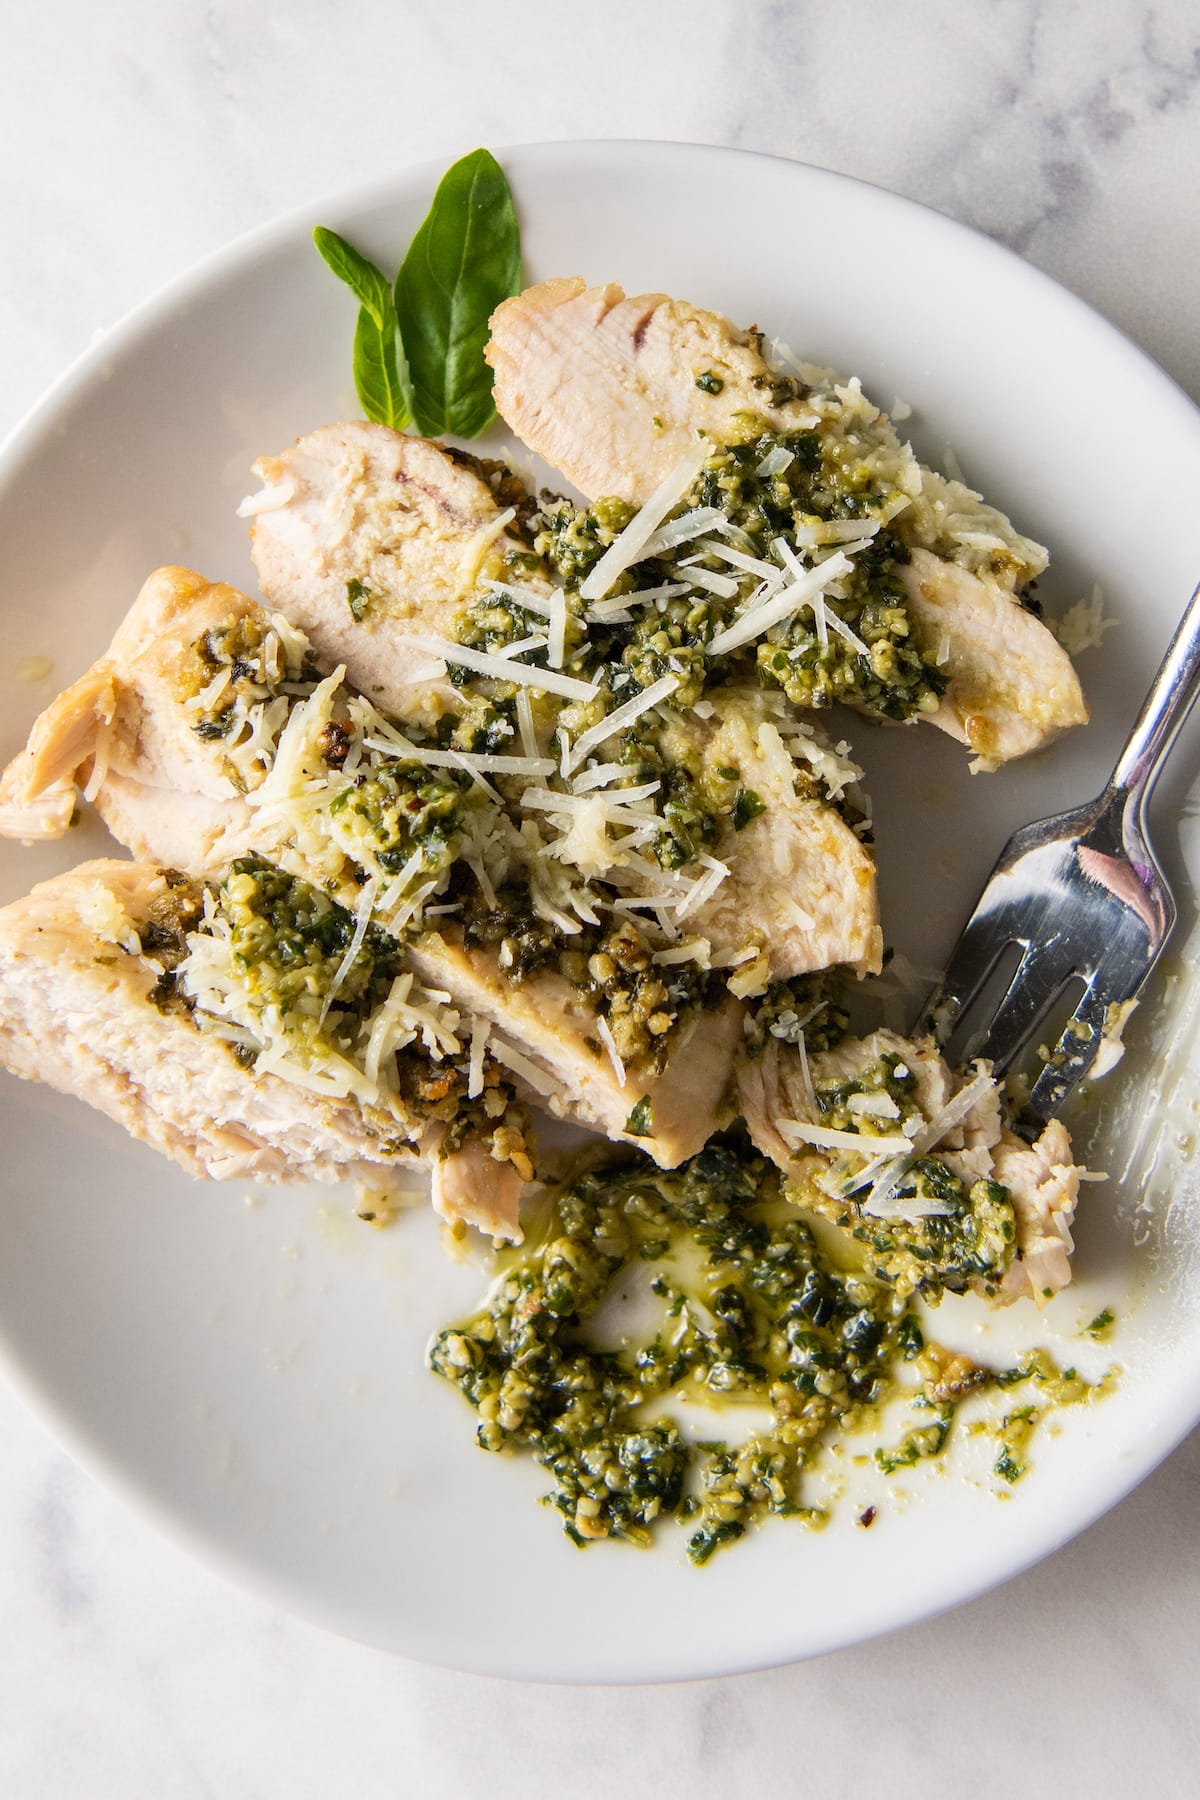 cut up cooked chicken with pesto on top